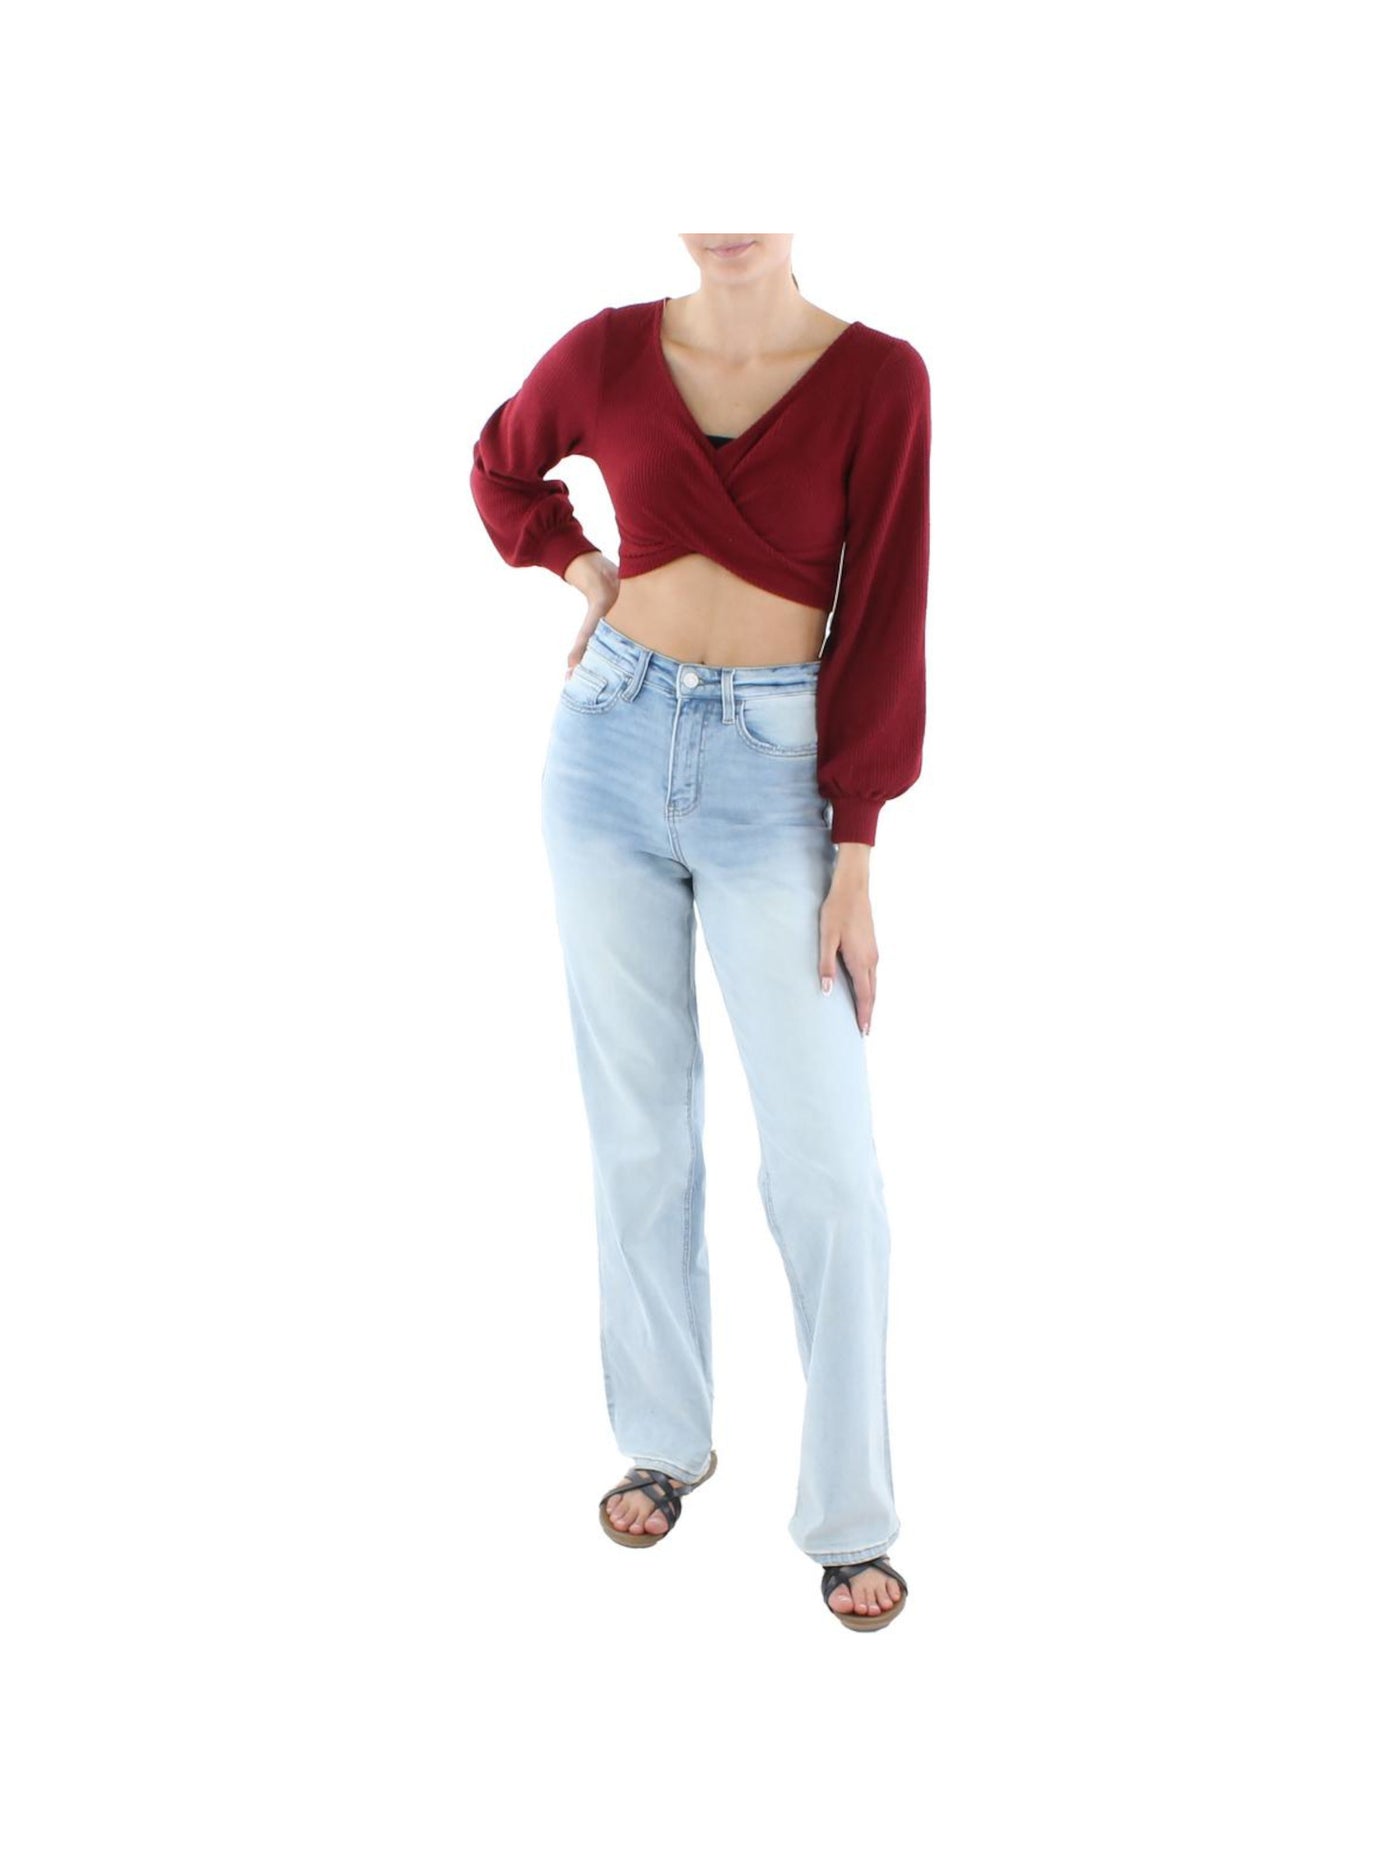 ALMOST FAMOUS Womens Red Ribbed Twist Front Long Sleeve V Neck Crop Top Sweater Juniors M